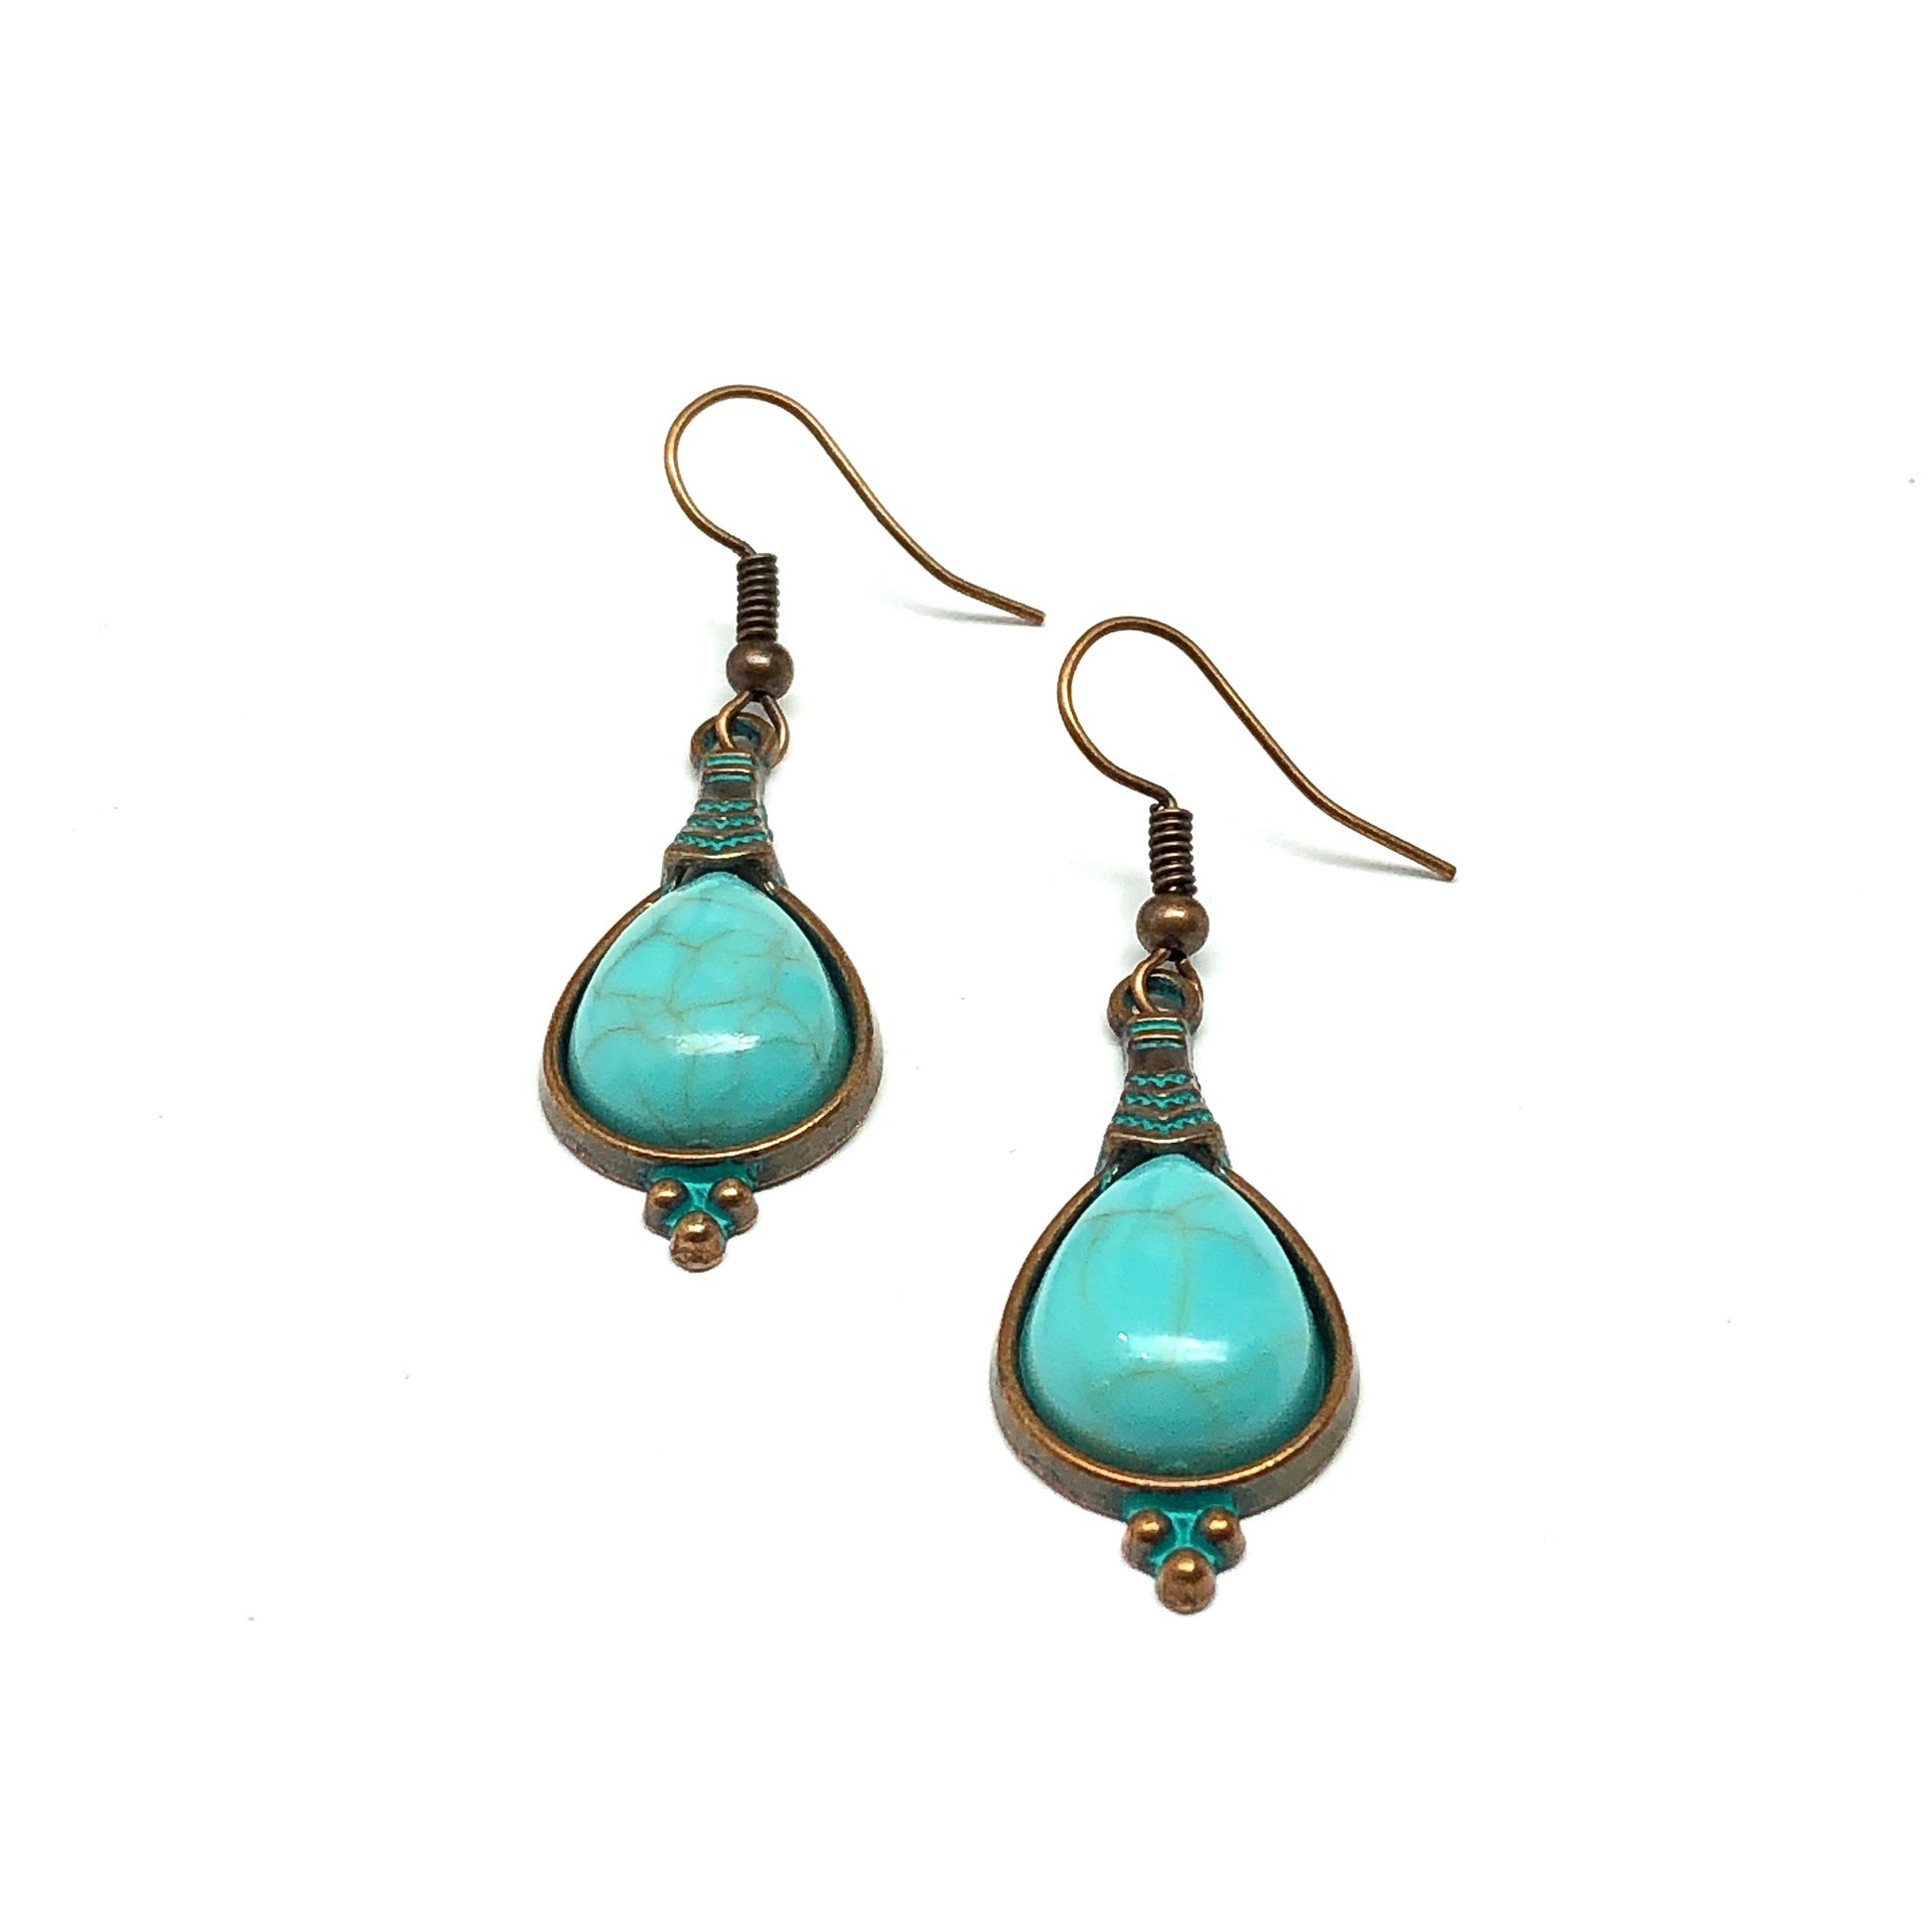 Rustic Bronzed Baby Blue Turquoise Teardrop Earrings | Boho Style to Country Girl Jewelry at Blingschlingers in USA